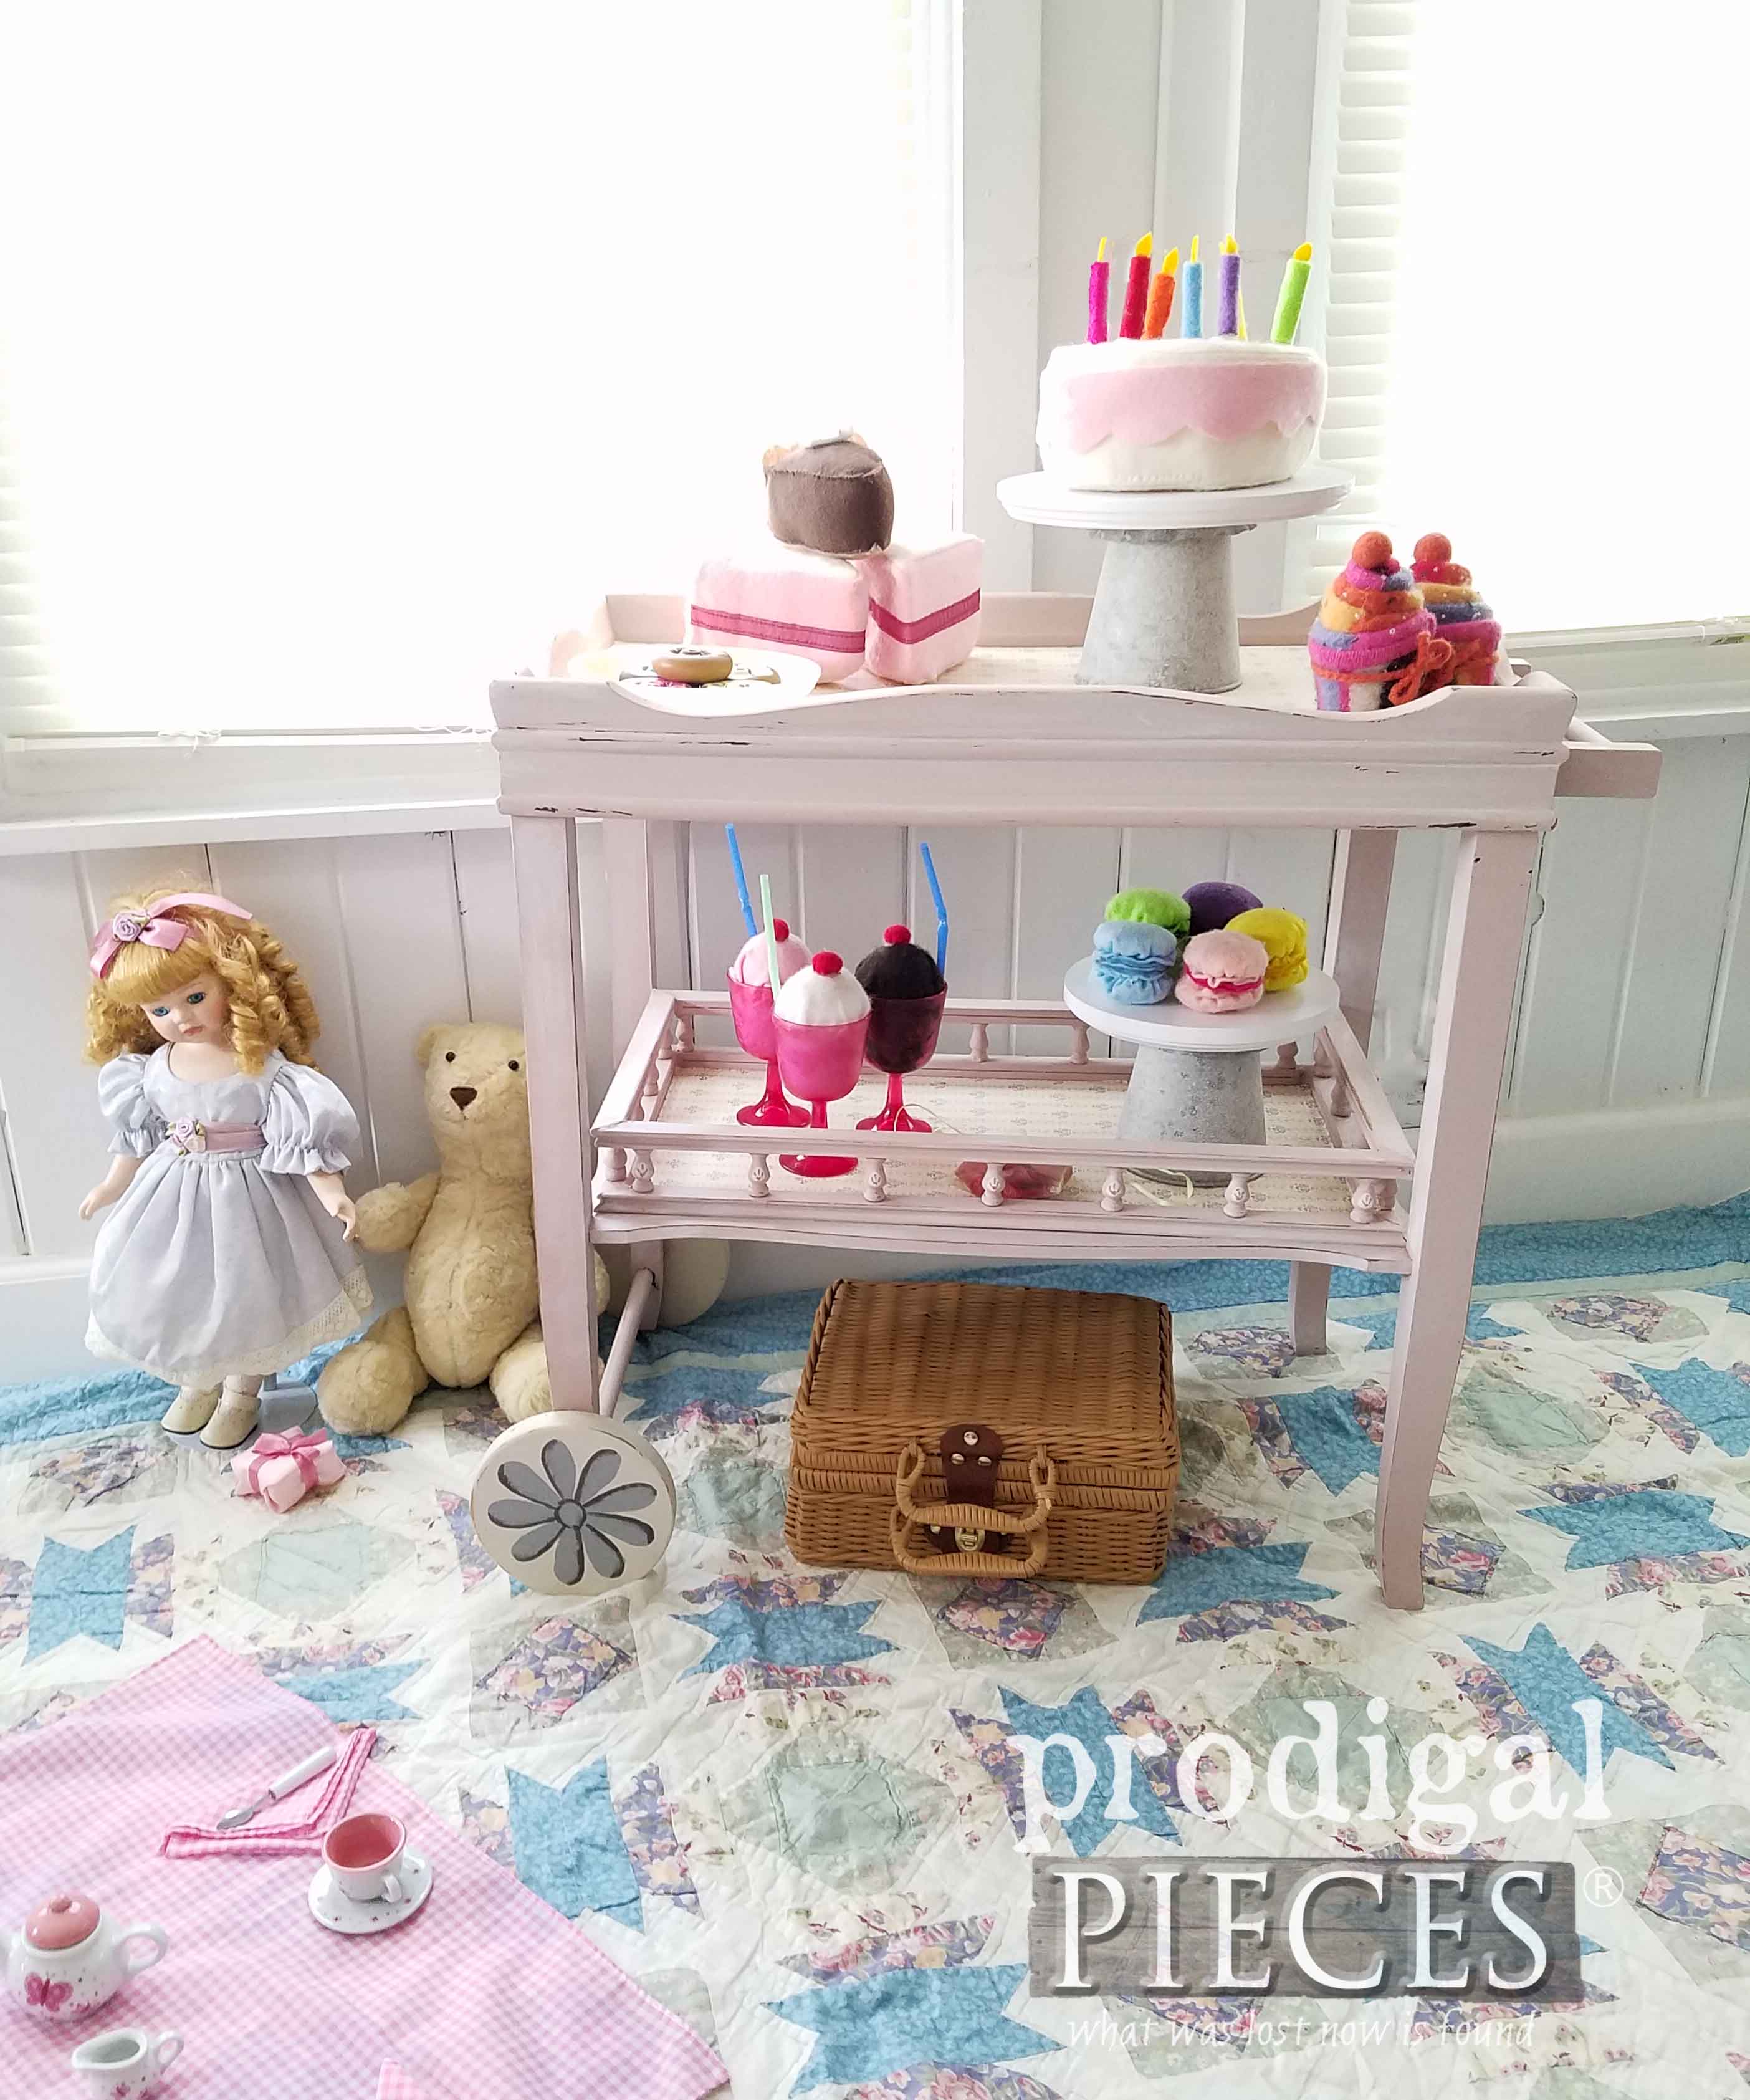 Repurposed Side Table into Little Girl's Tea Cart by Larissa of Prodigal Pieces | prodigalpieces.com